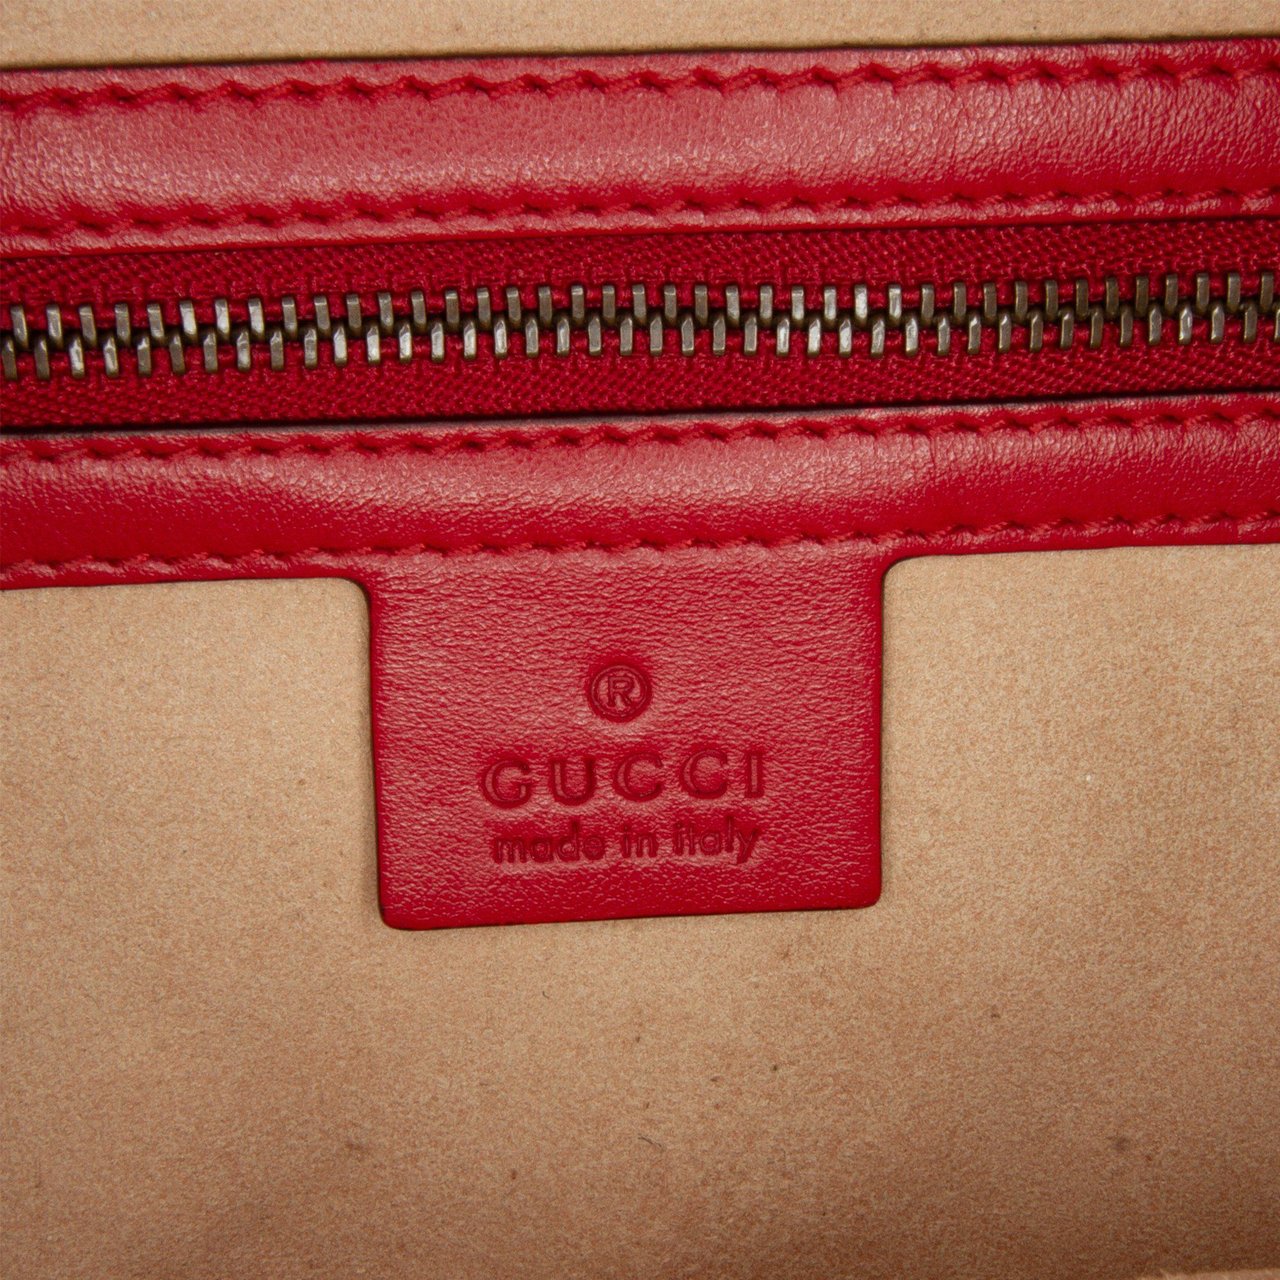 Gucci Small GG Marmont Sylvie Top Handle Satchel Rood